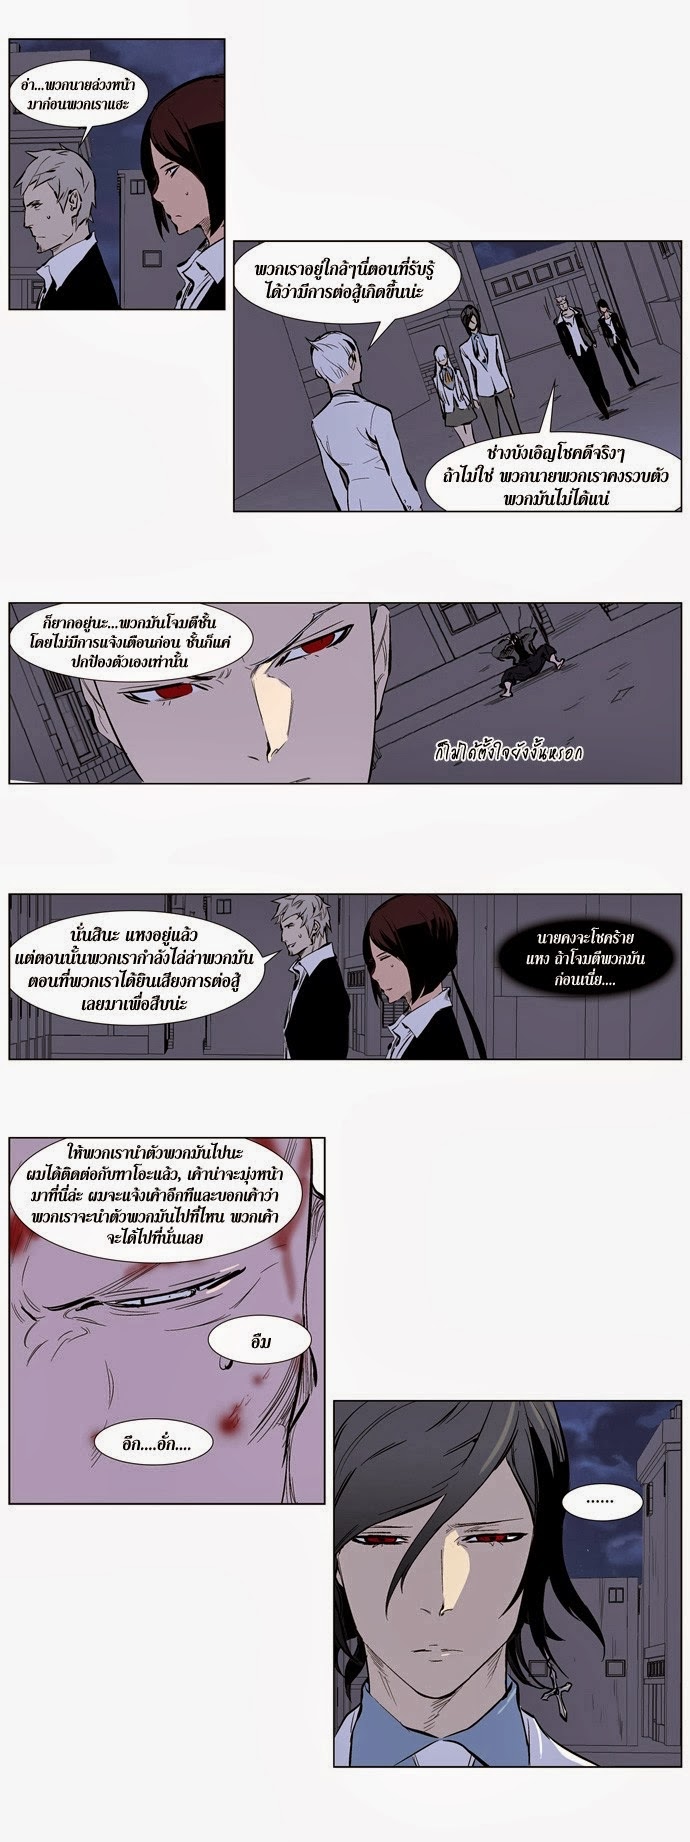 Noblesse 247 018